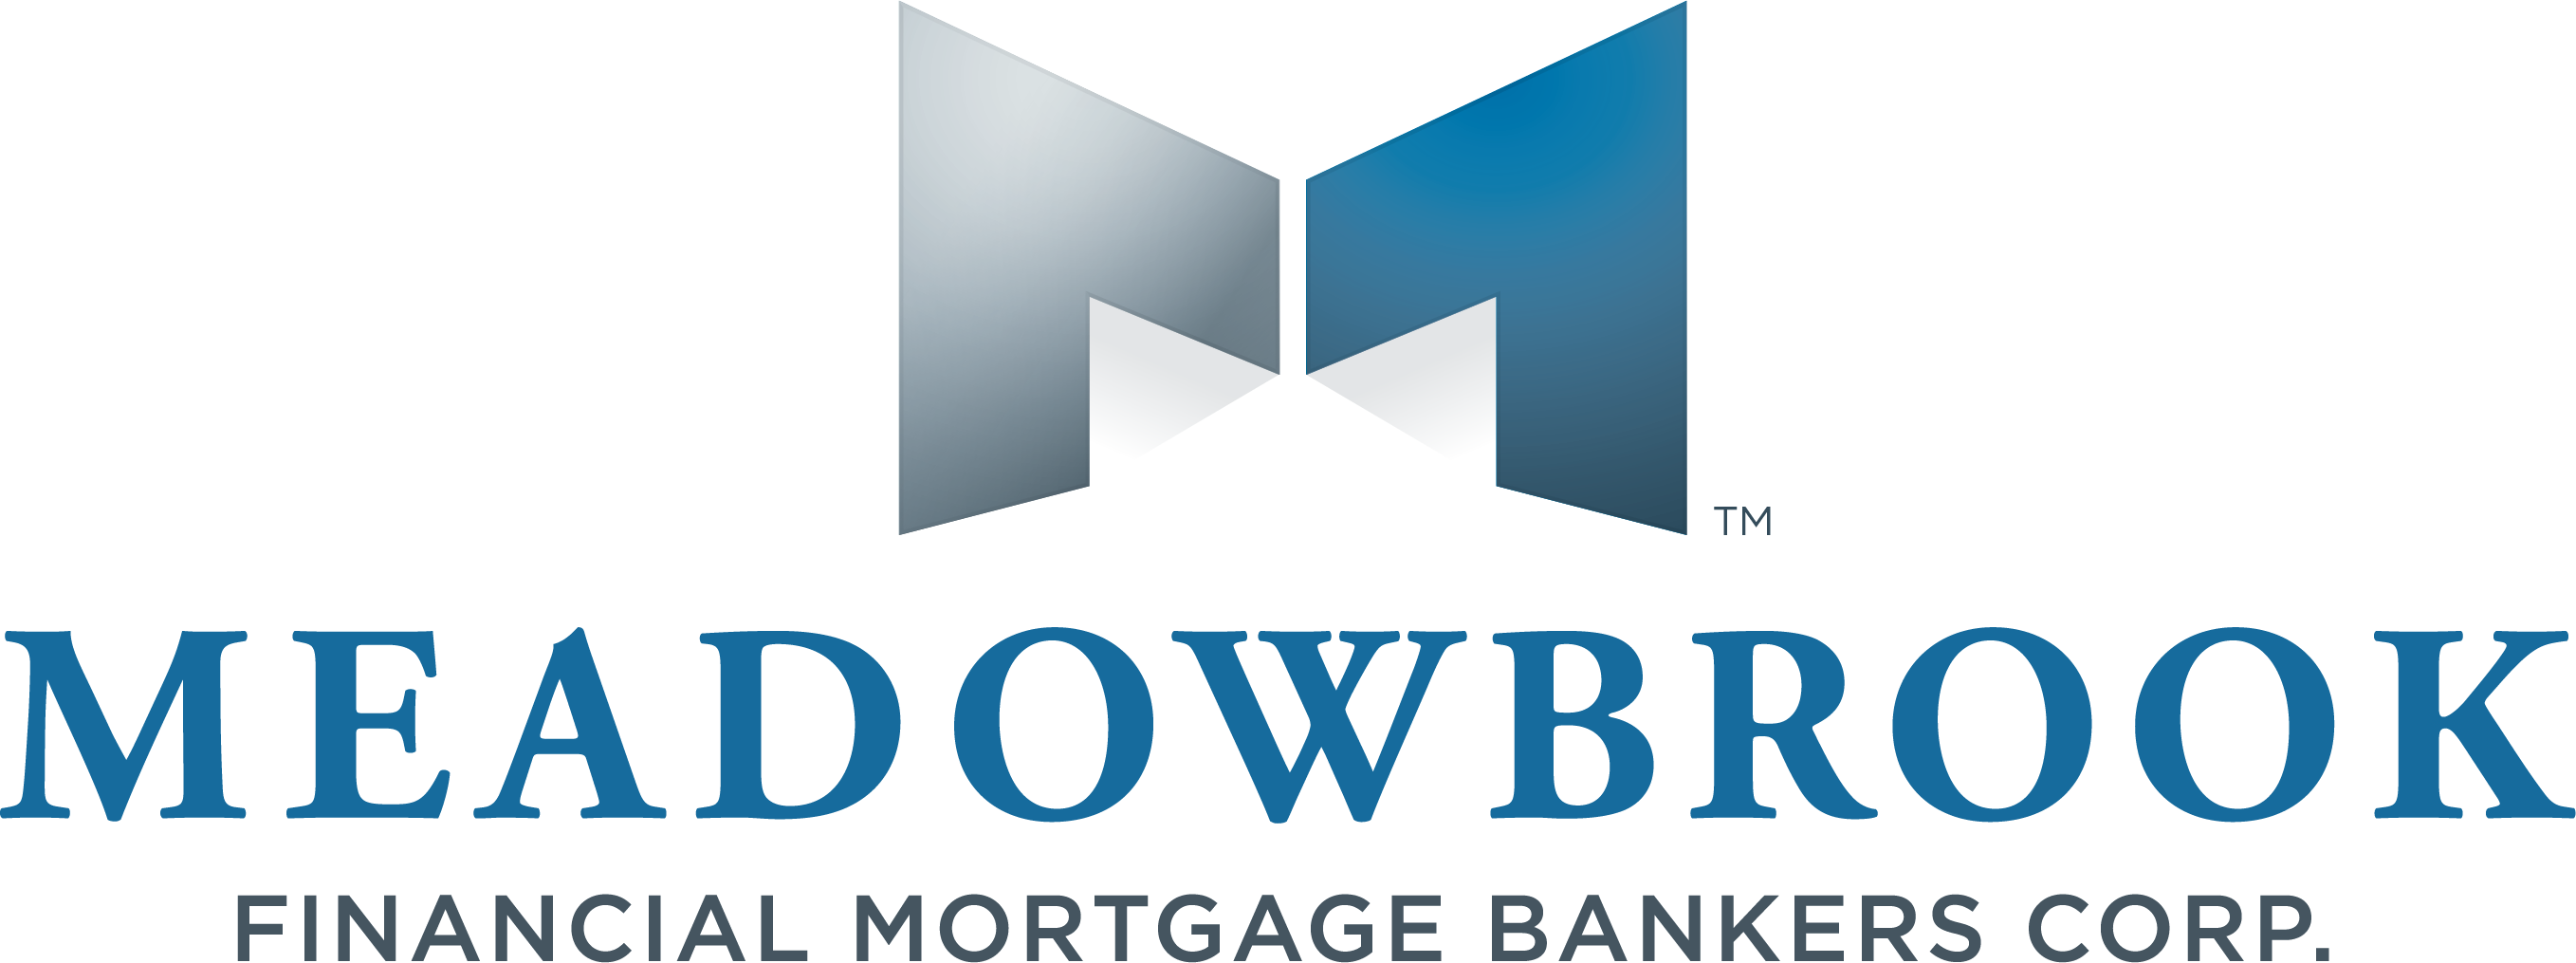 Meadowbrook Financial Mortgage Bankers Corp. Company Logo